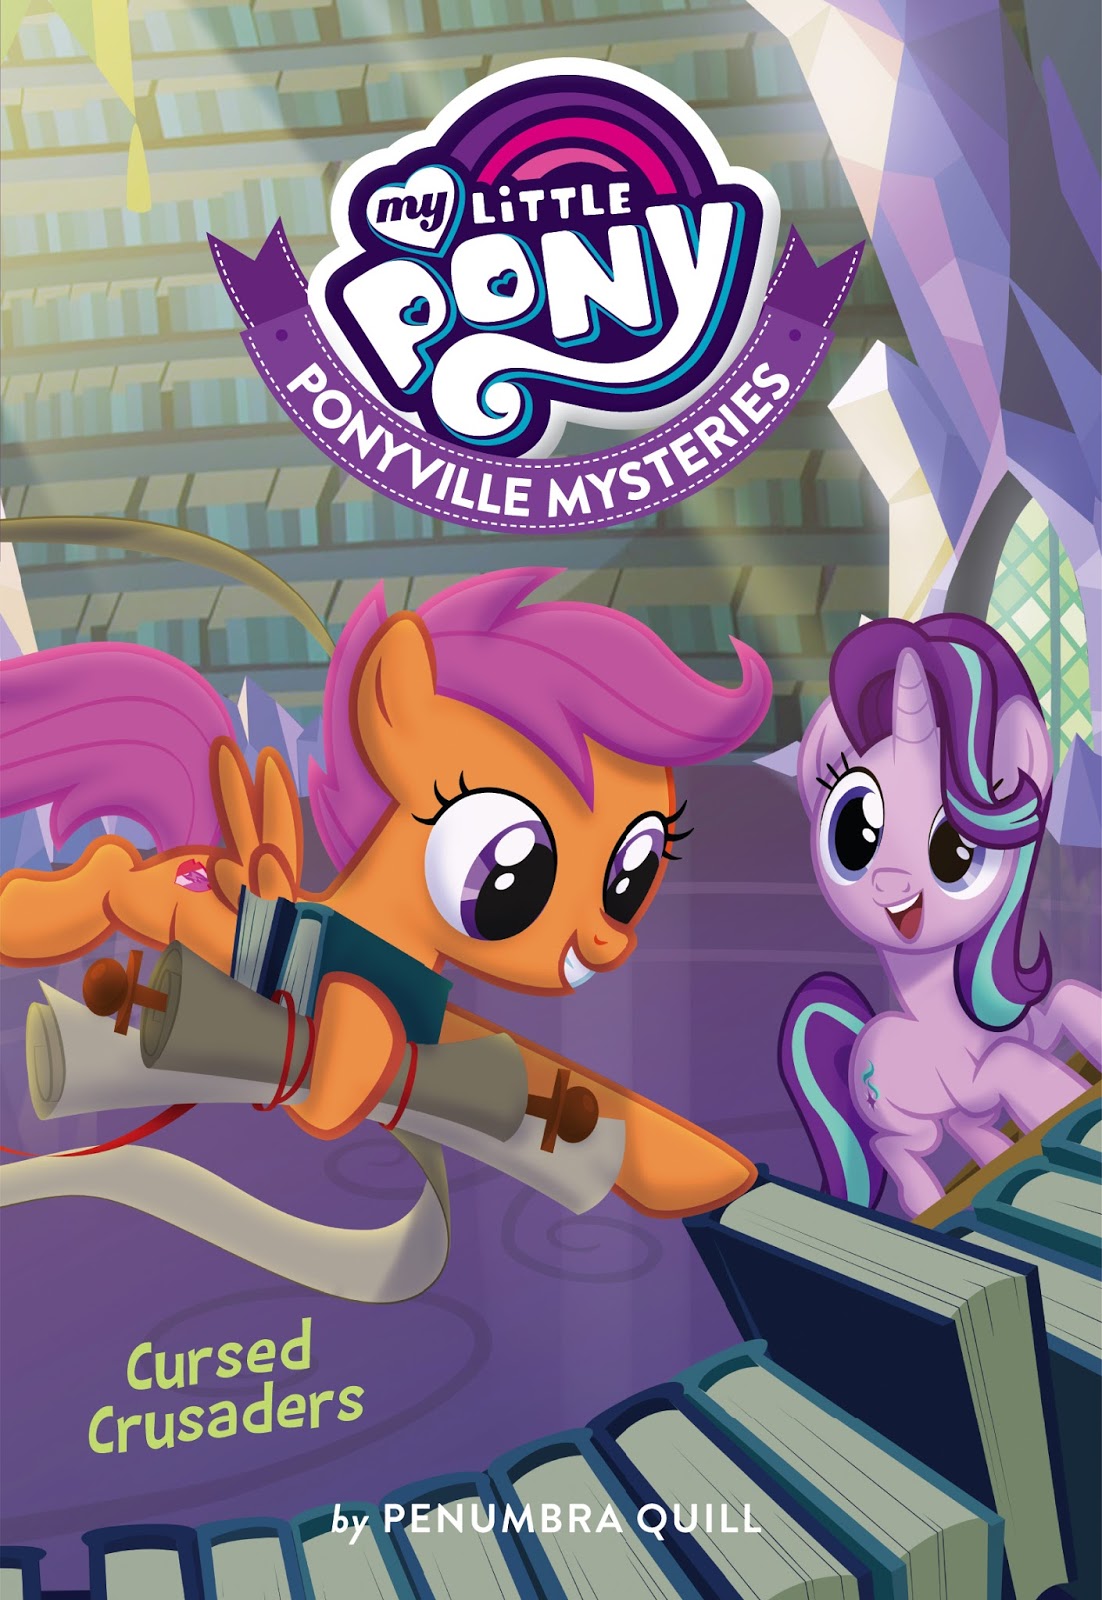 Equestria Daily - MLP Stuff!: Ponyville Mysteries #6, 